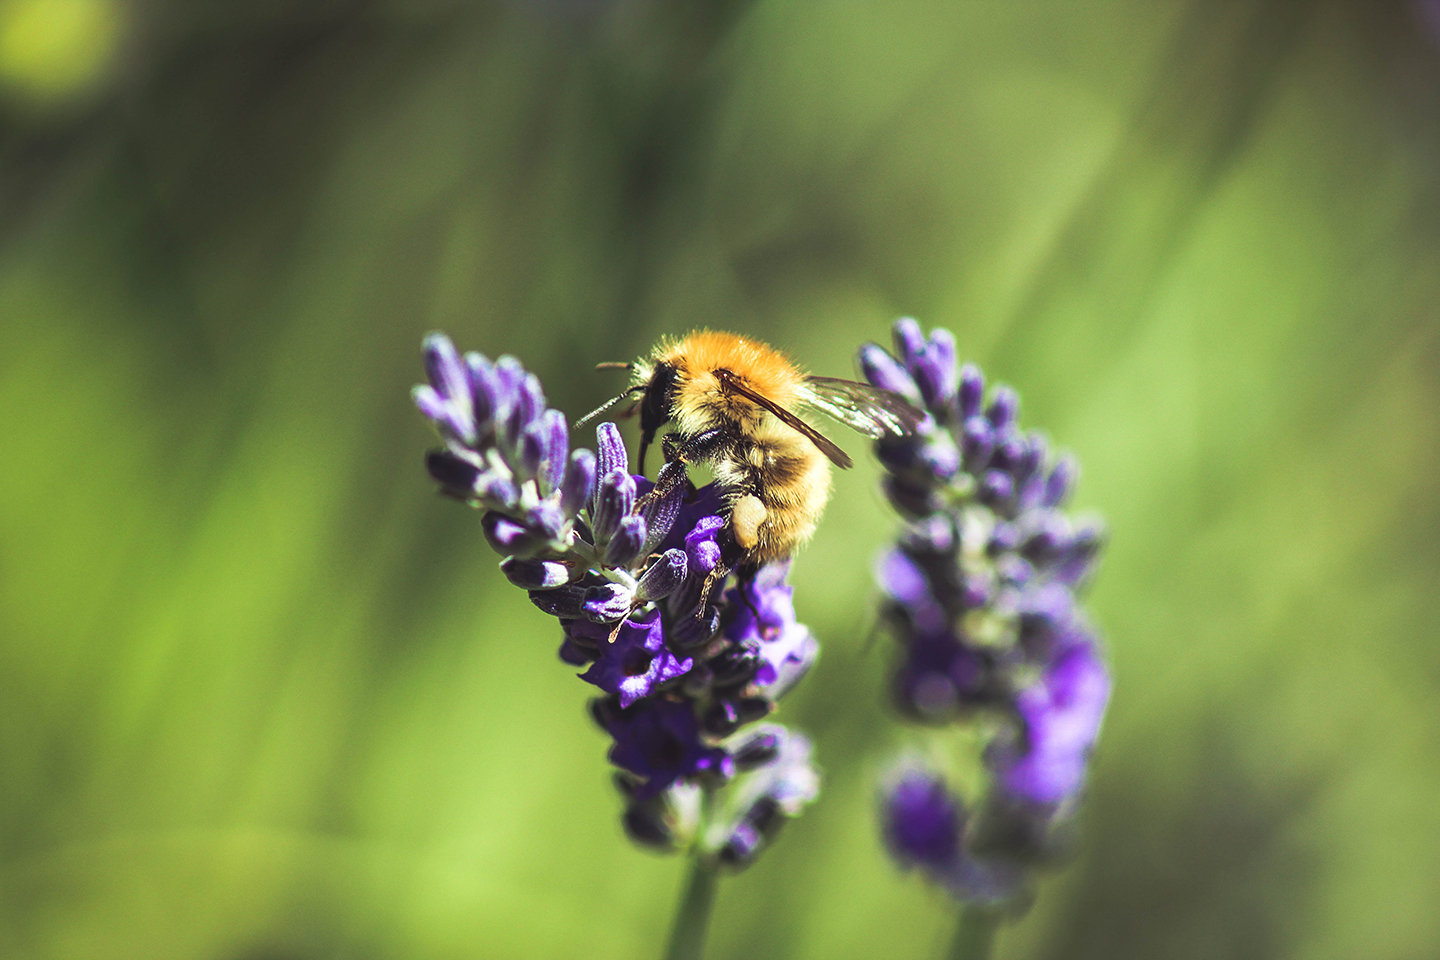 Russell-Cooke environmental commitment. Bee on a purple lavender flower.